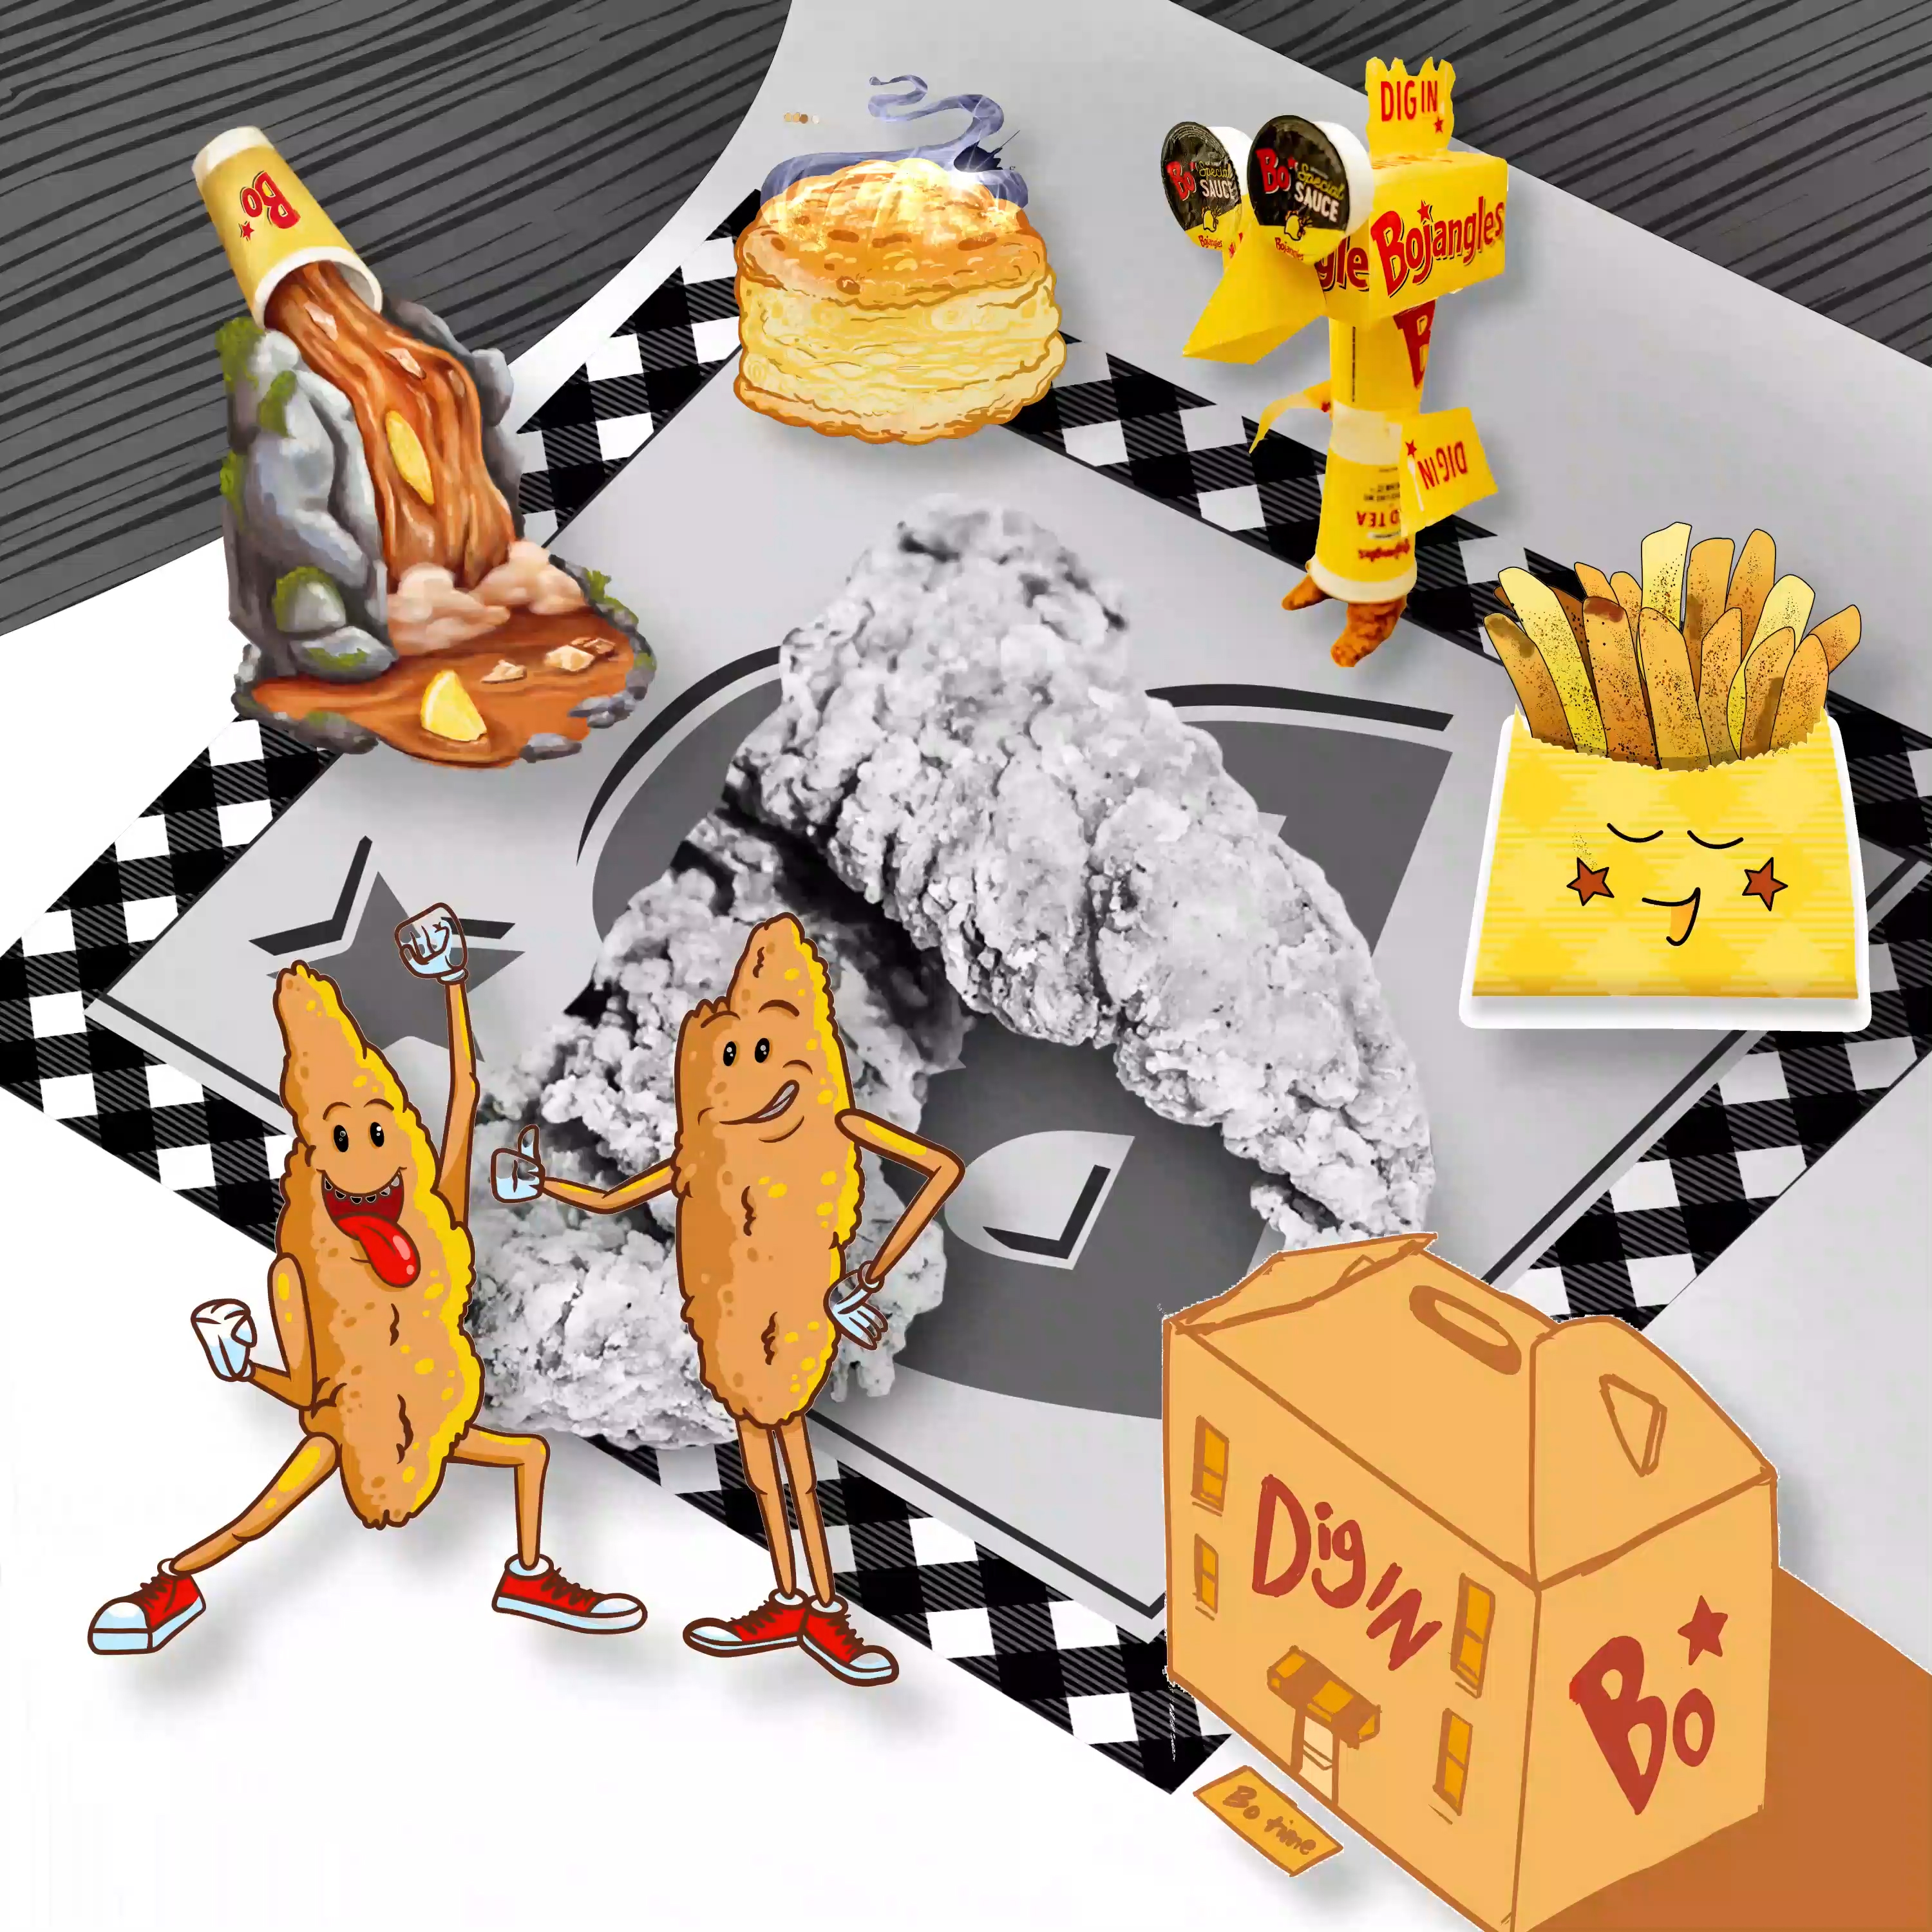 NFT of collaborative digital art from all seven artists celebrating Chicken Supremes - 200 available.